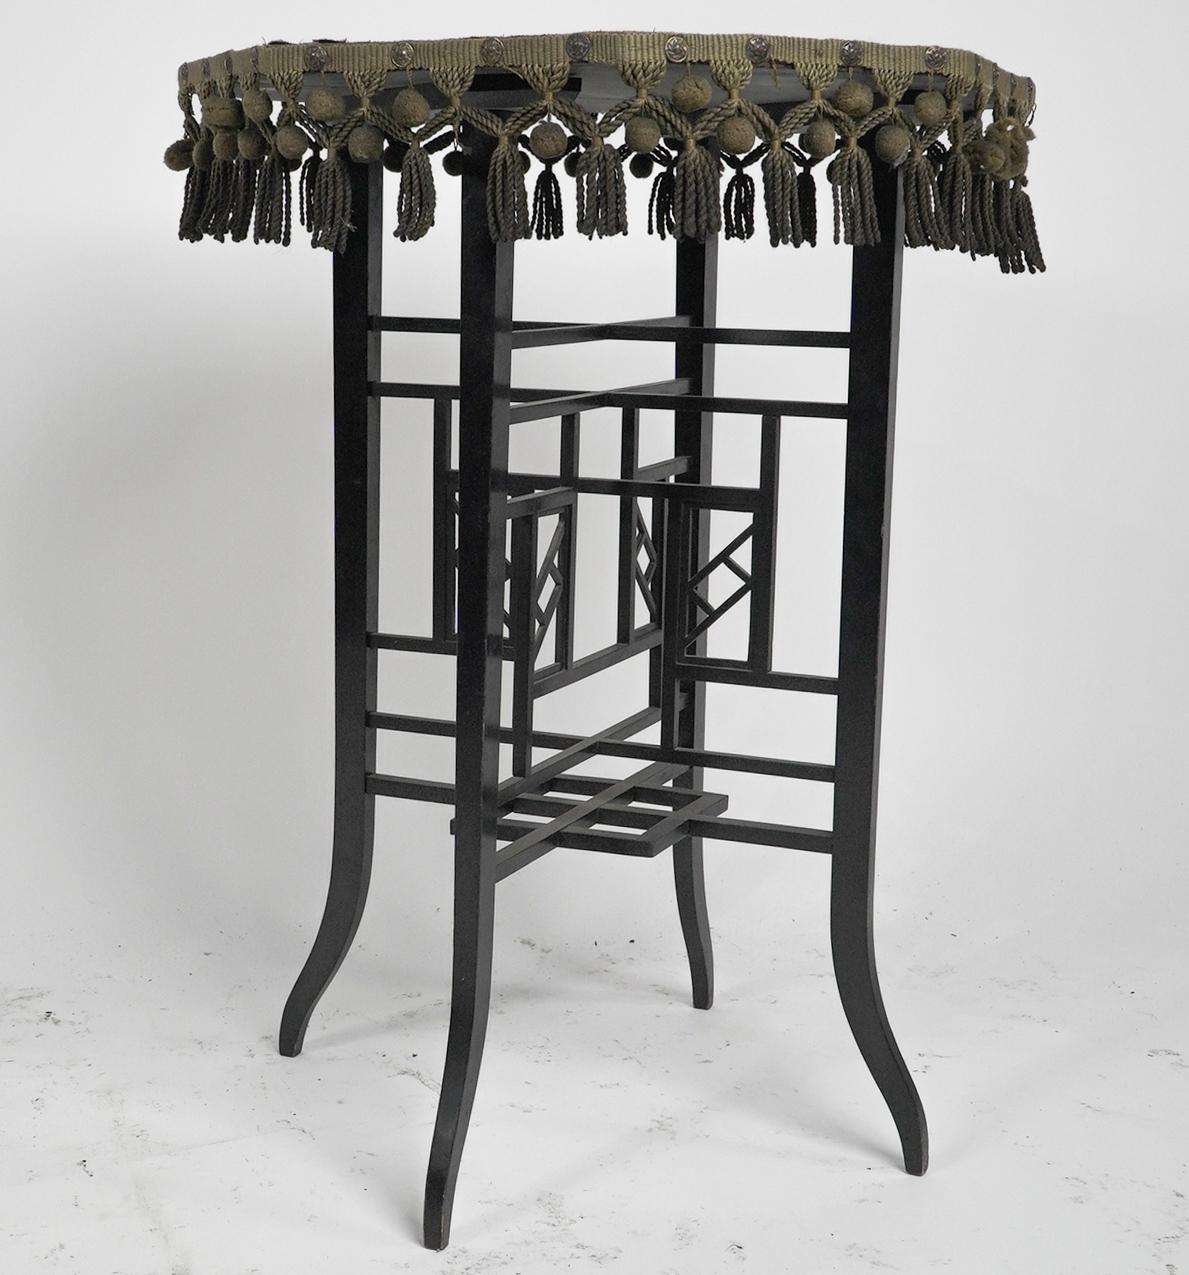 An Anglo-Japanese ebonized walnut side table retaining the original faded green baize top and all its little matching hanging balls. The legs have a multitude of fretwork details uniting the four legs into a flourishing Japanese design.